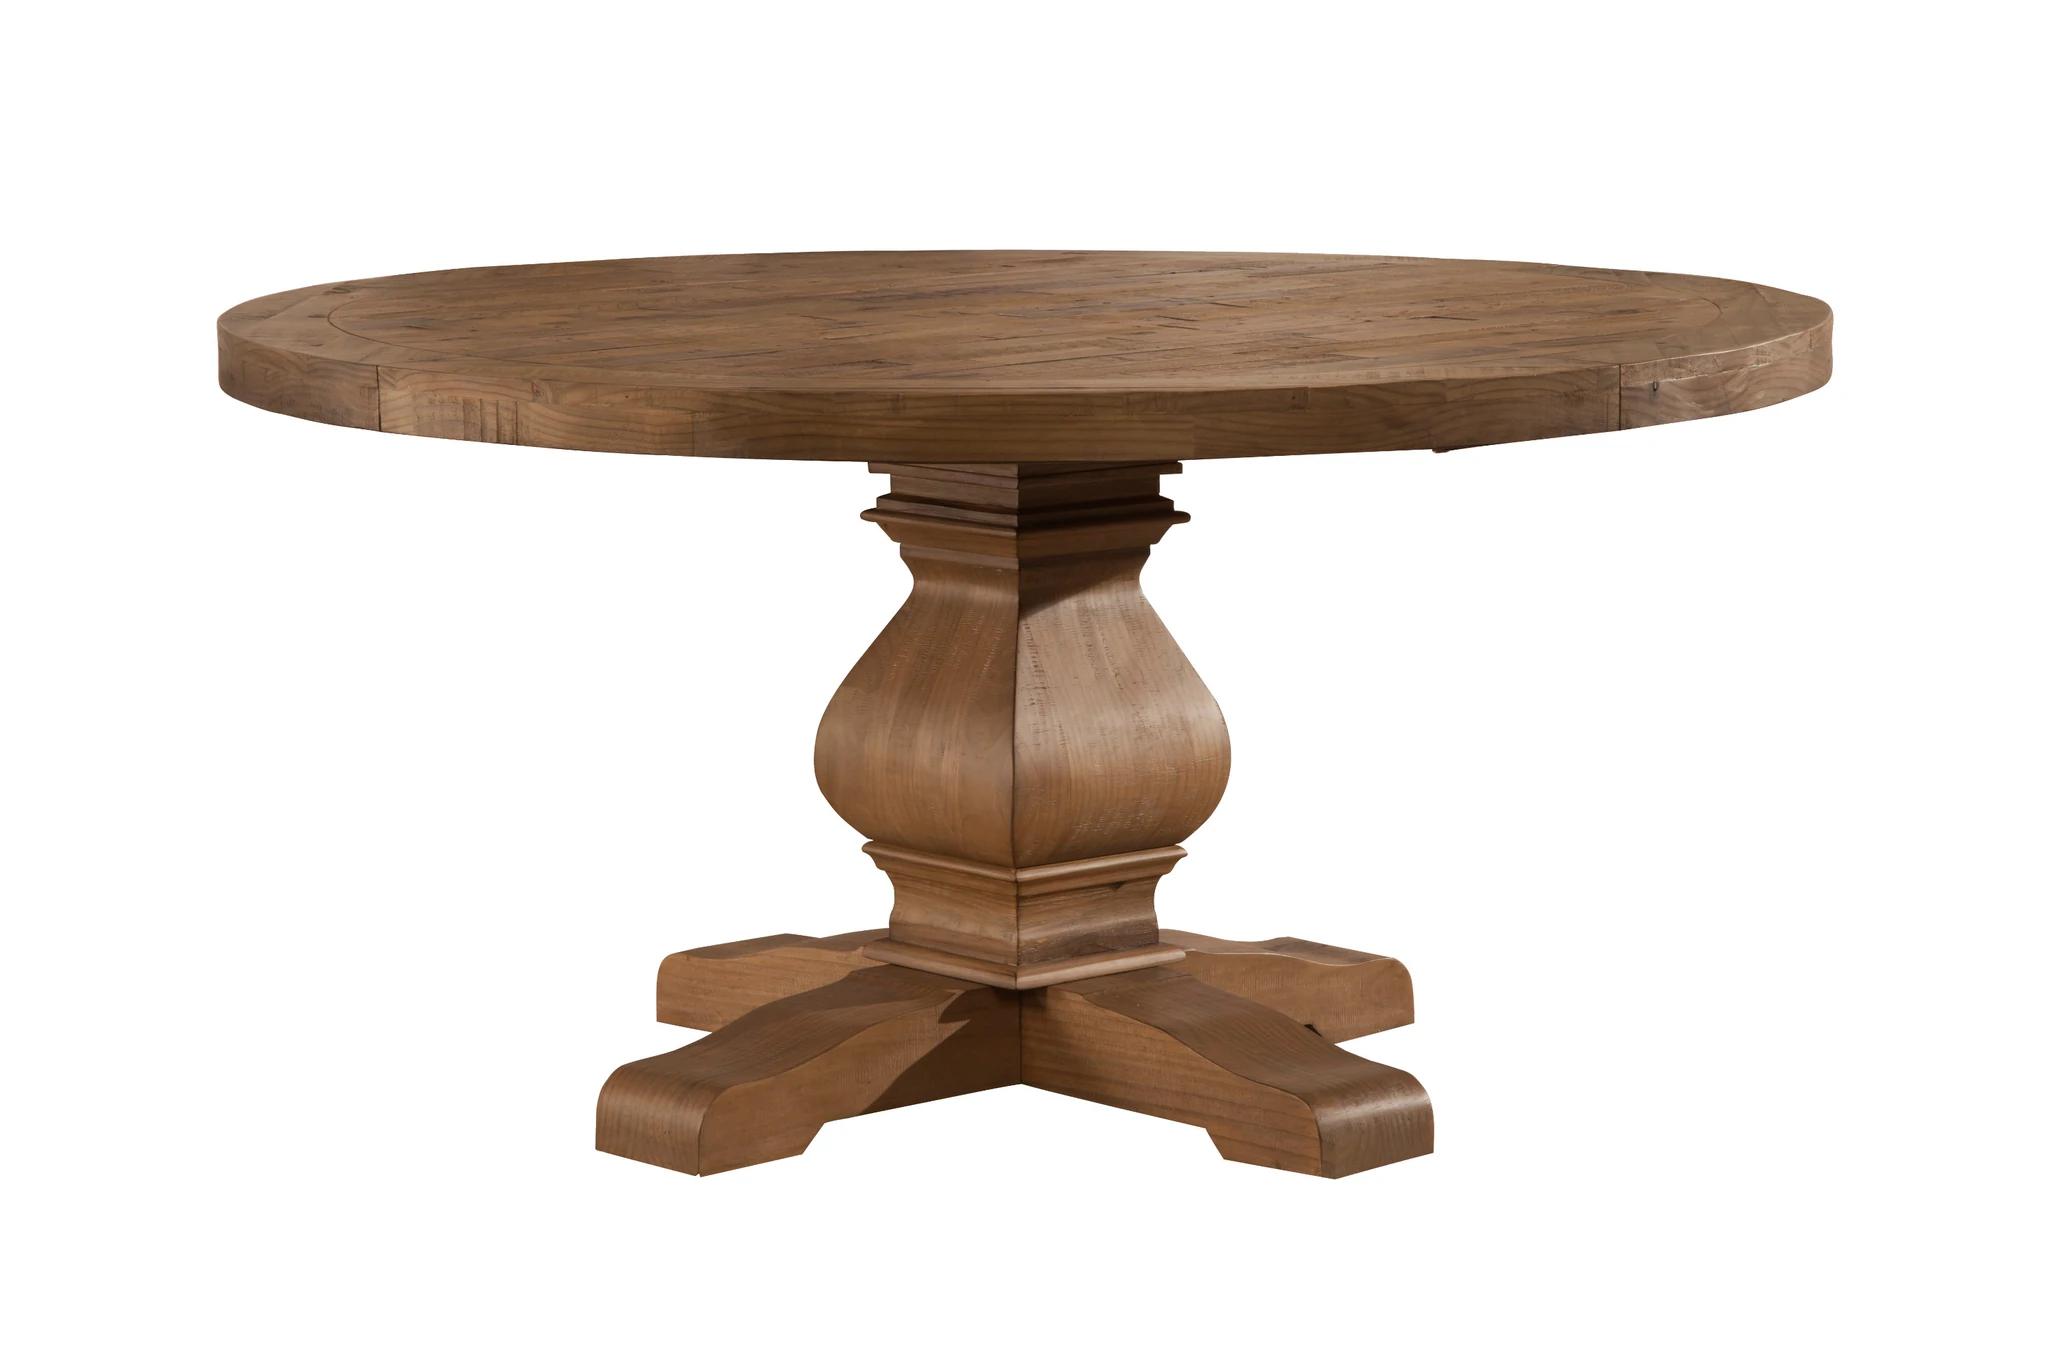 

    
Reclaimed Natural Round Solid Pine Dining Table Set 5 KENSINGTON ALPINE Rustic
